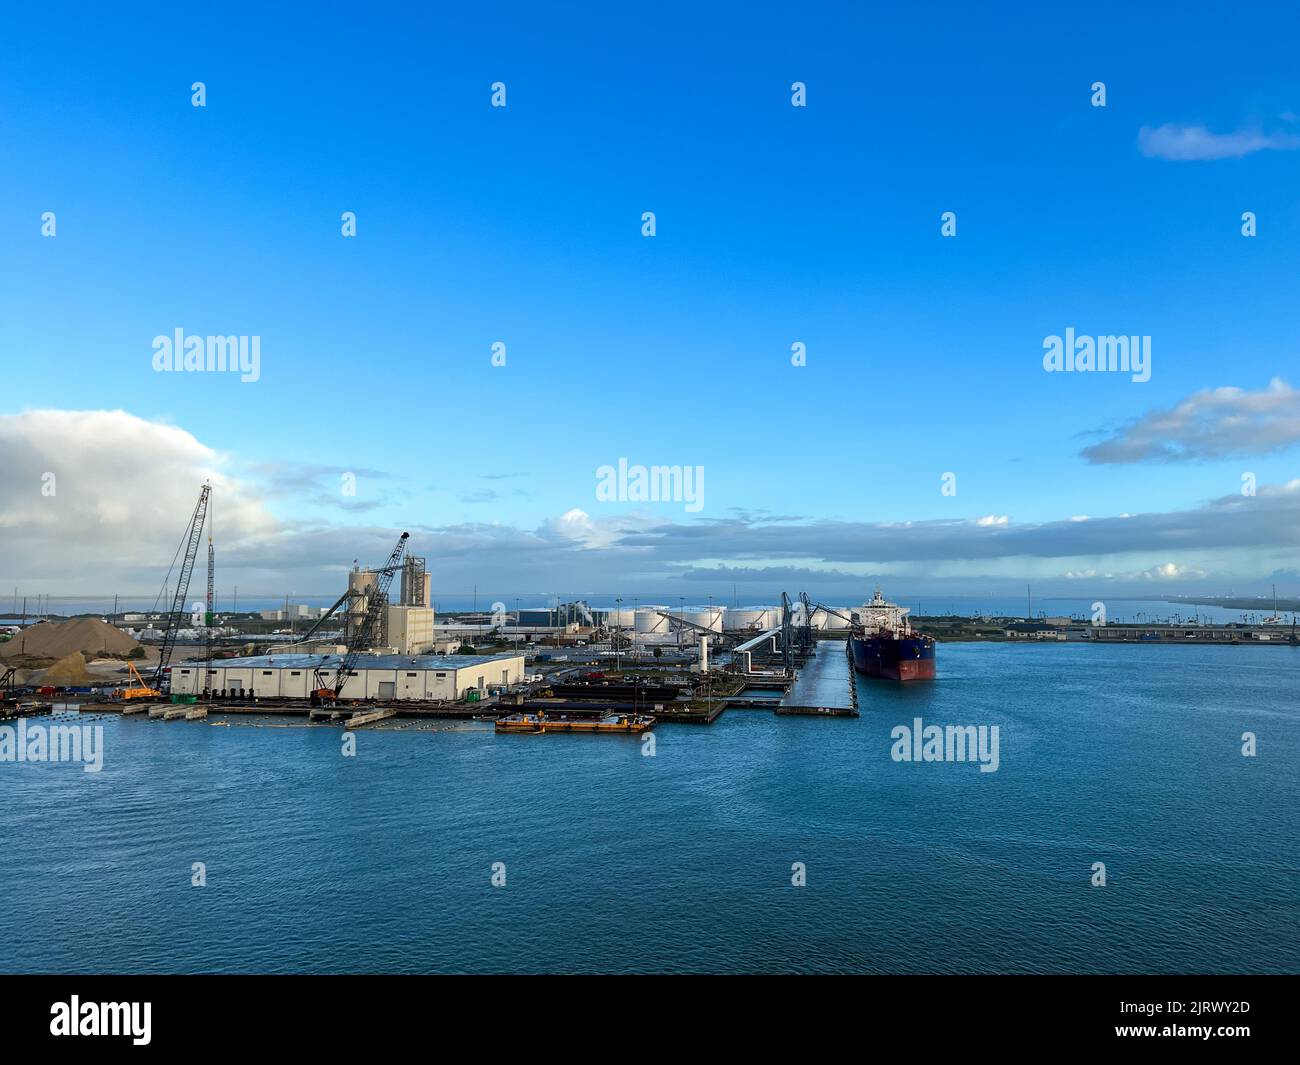 Orlando, FL USA - February 17, 2022: An aerial view of  Port Canaveral from a cruise ship Florida. Stock Photo